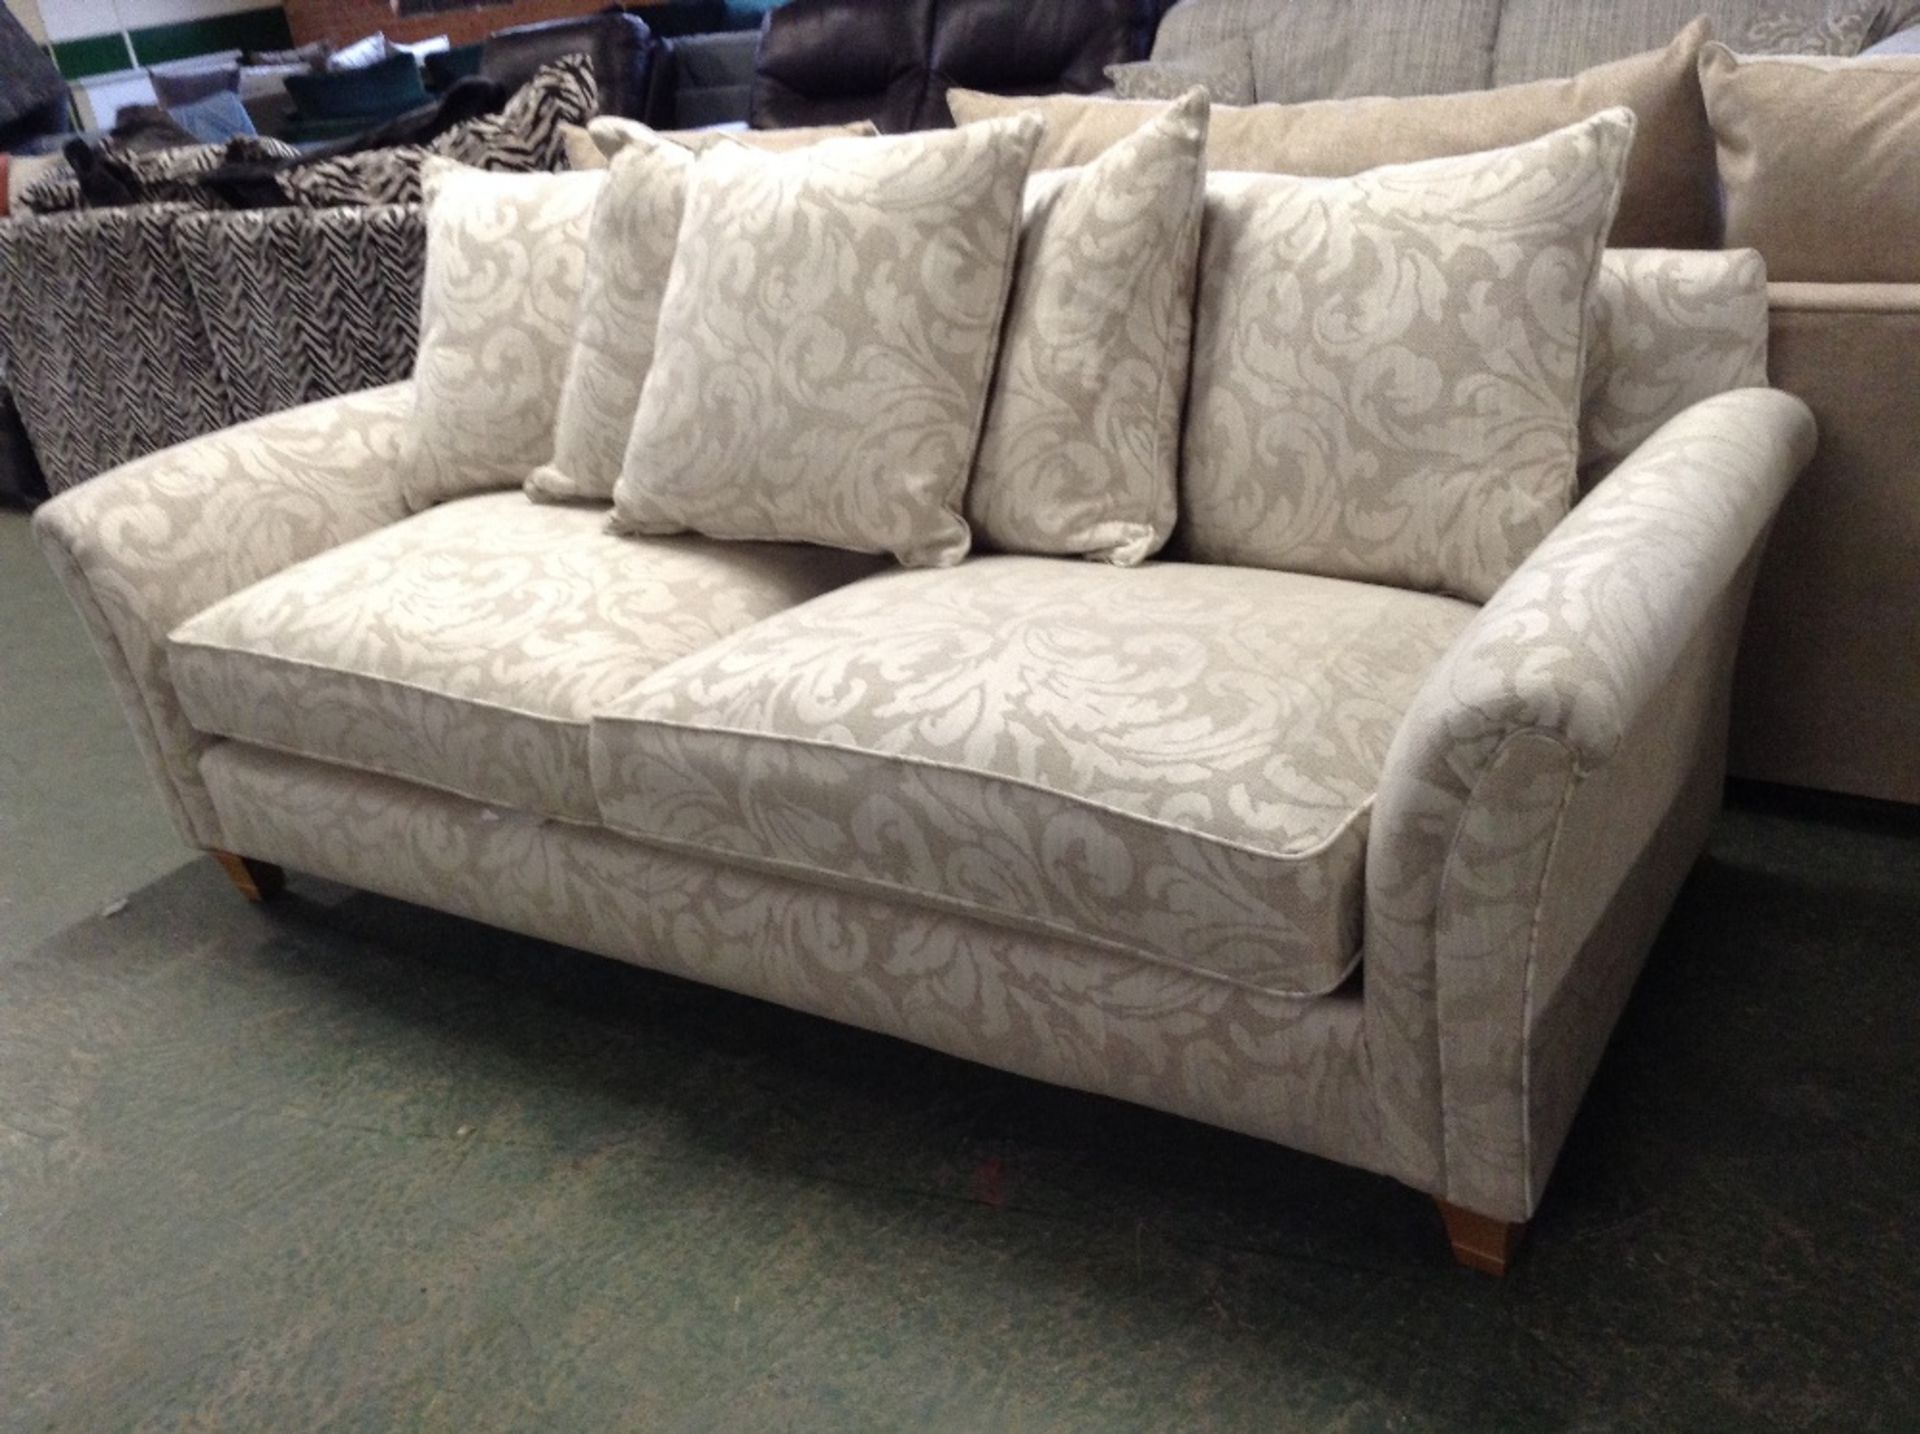 CREAM AND BEIGE PATTERNED LARGE 3 SEATER SOFA (TRO